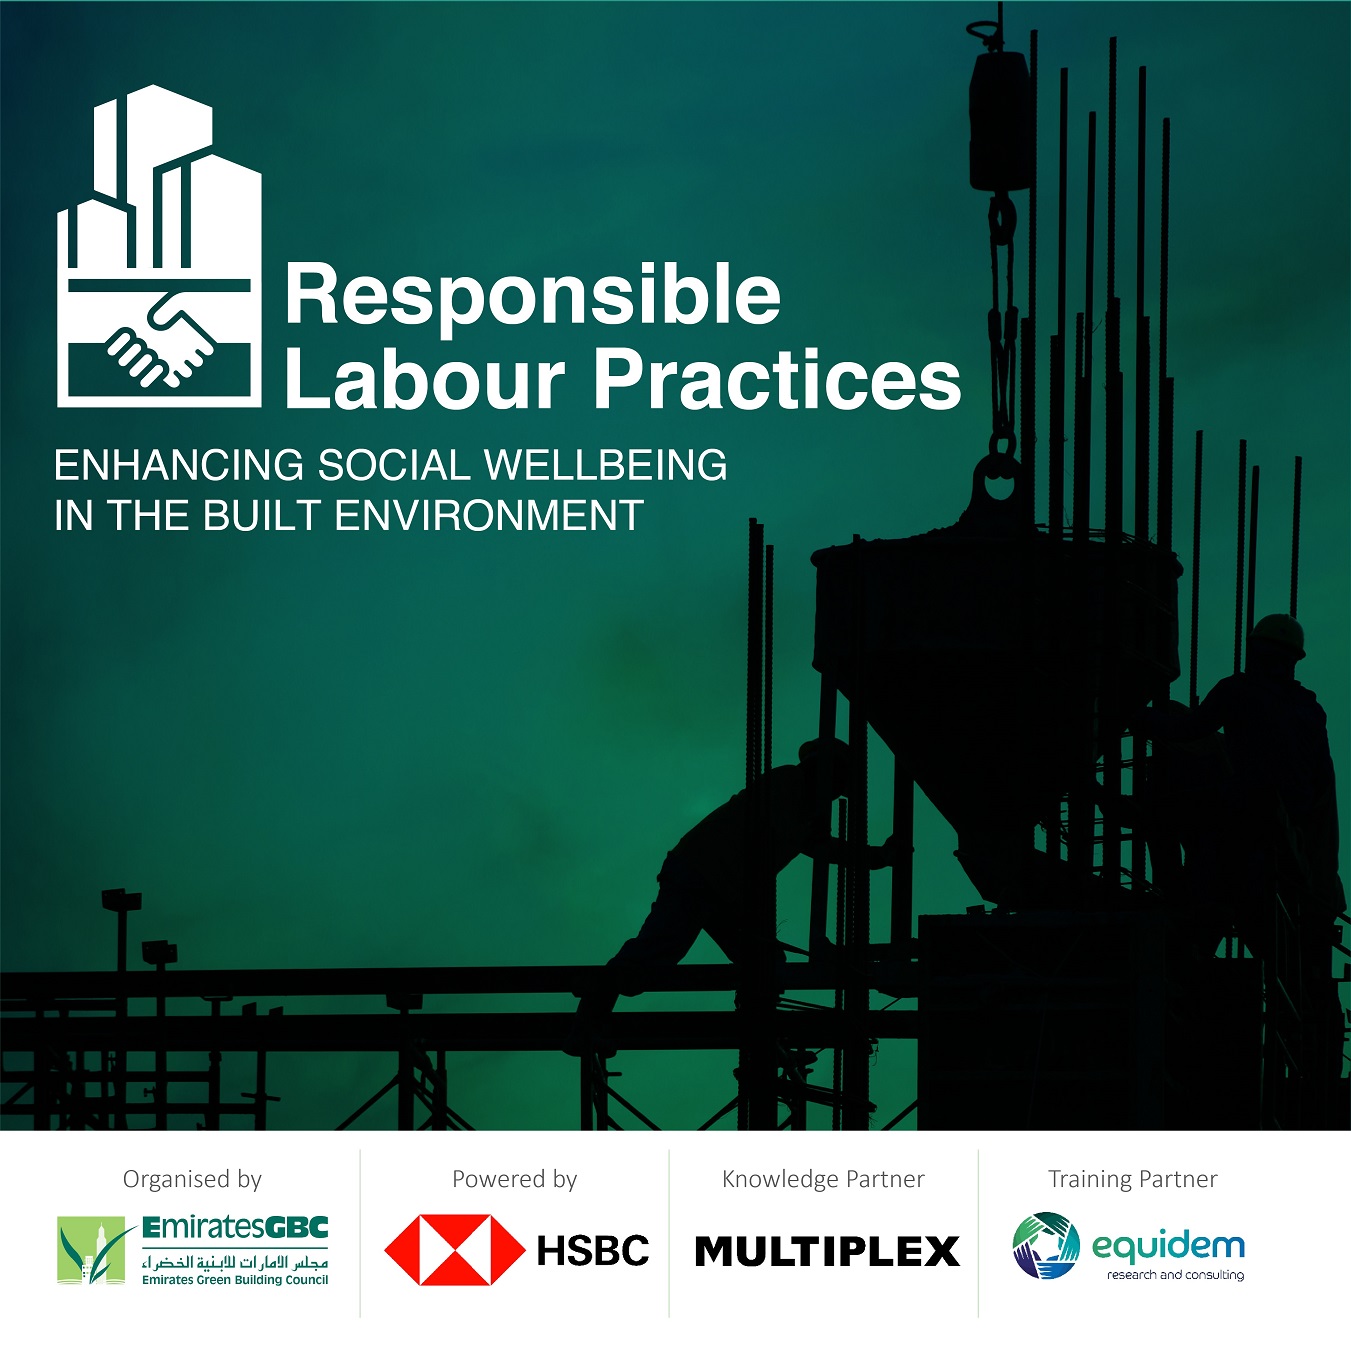 EmiratesGBC And HSBC Middle East Launch Capacity Building Programme On Socially Responsible Labour Practices For The Built Environment With Equidem And Multiplex